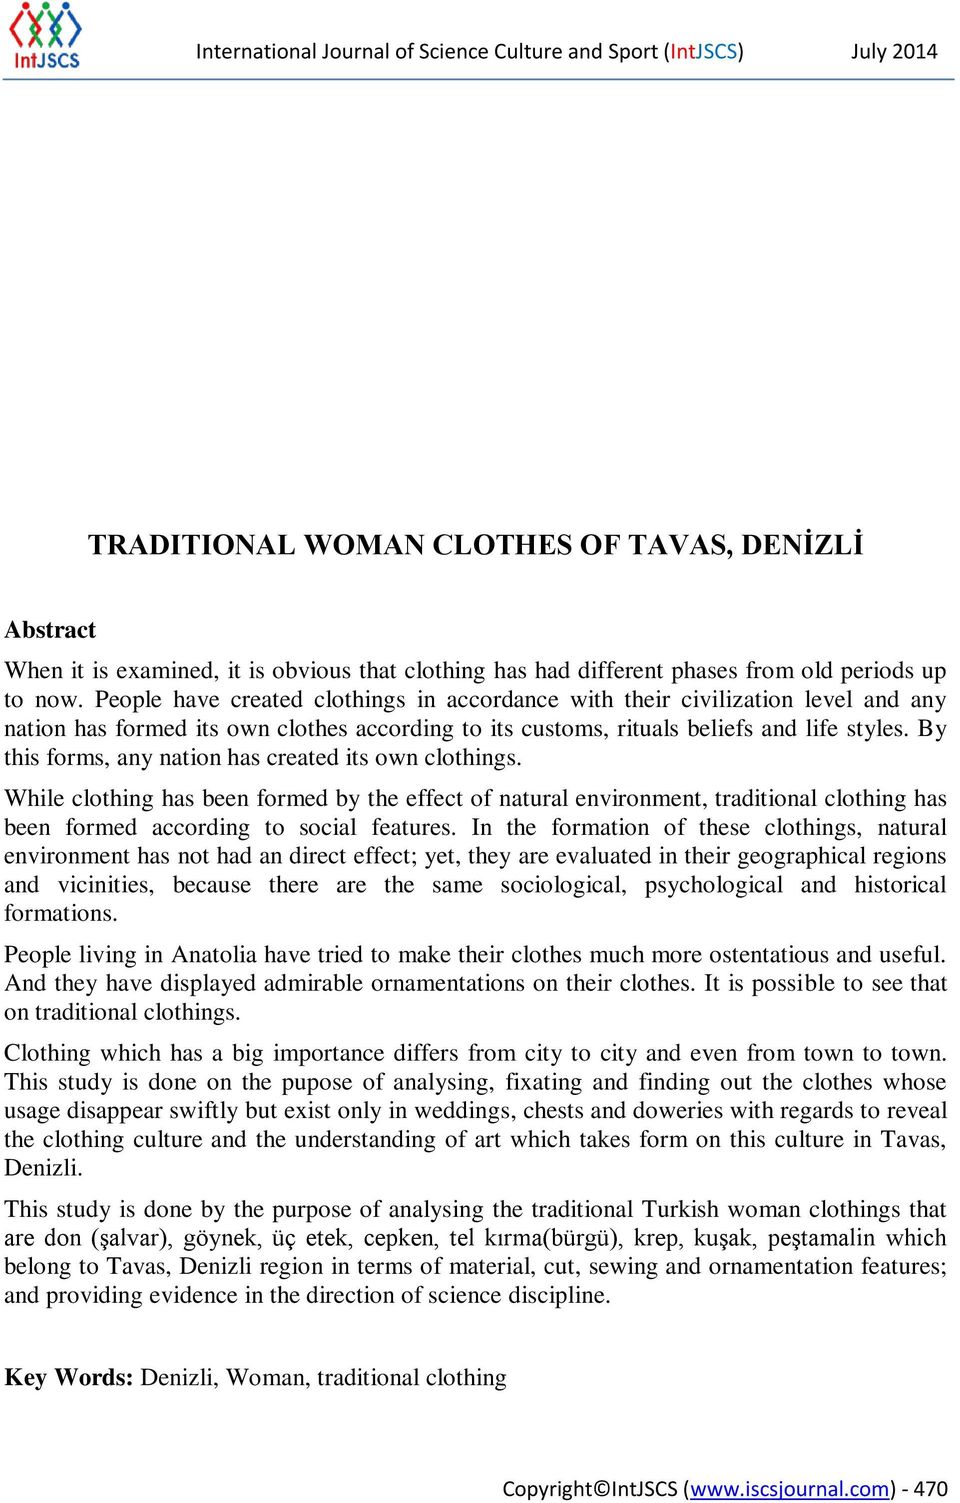 People have created clothings in accordance with their civilization level and any nation has formed its own clothes according to its customs, rituals beliefs and life styles.